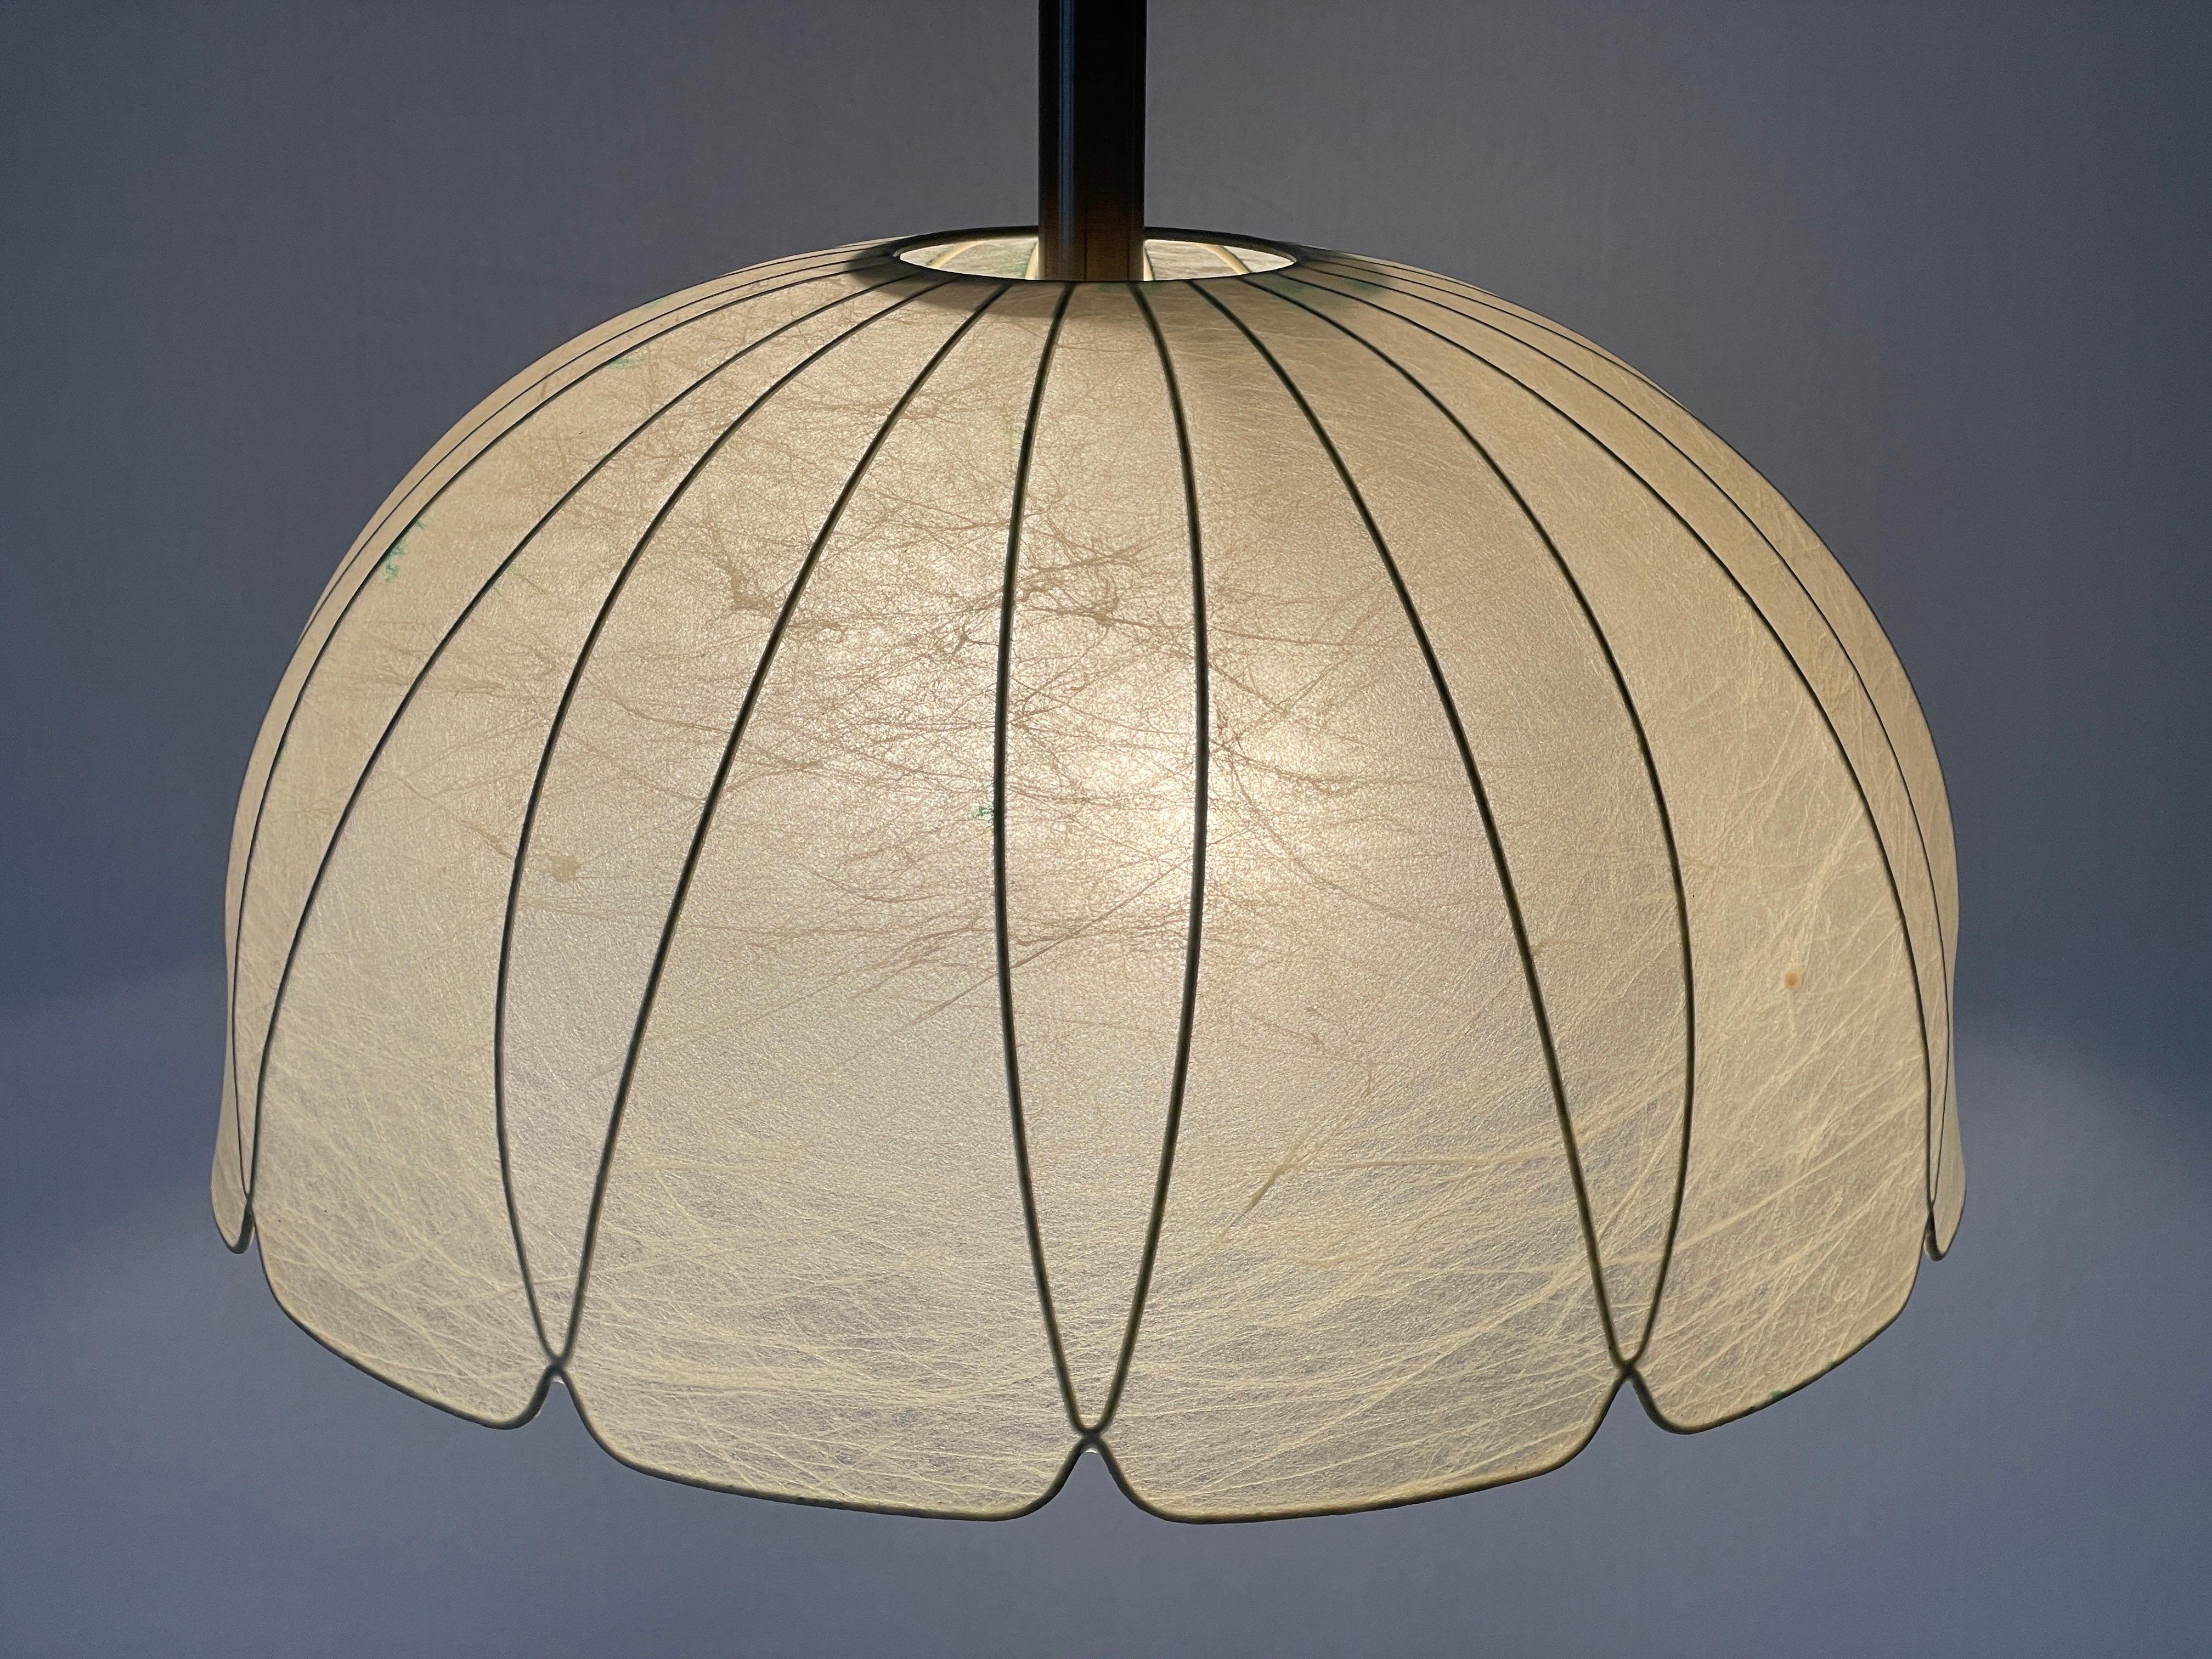 Flower Design Cocoon Adjustable Height Pendant Lamp by Goldkant, 1960s, Germany For Sale 6